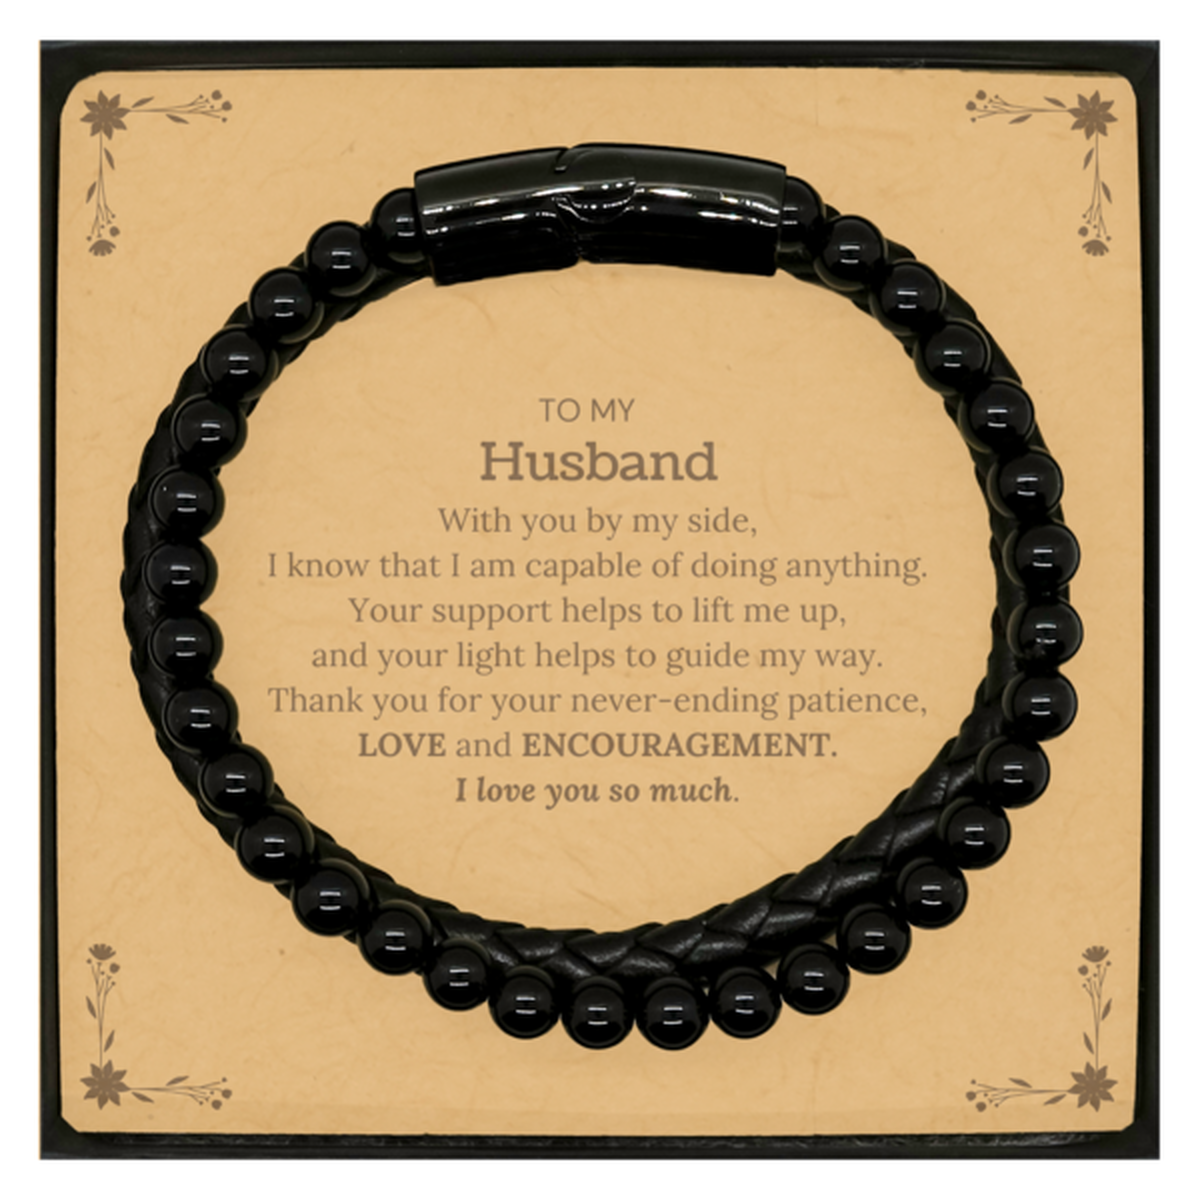 Appreciation Husband Stone Leather Bracelets Gifts, To My Husband Birthday Christmas Wedding Keepsake Gifts for Husband With you by my side, I know that I am capable of doing anything. I love you so much